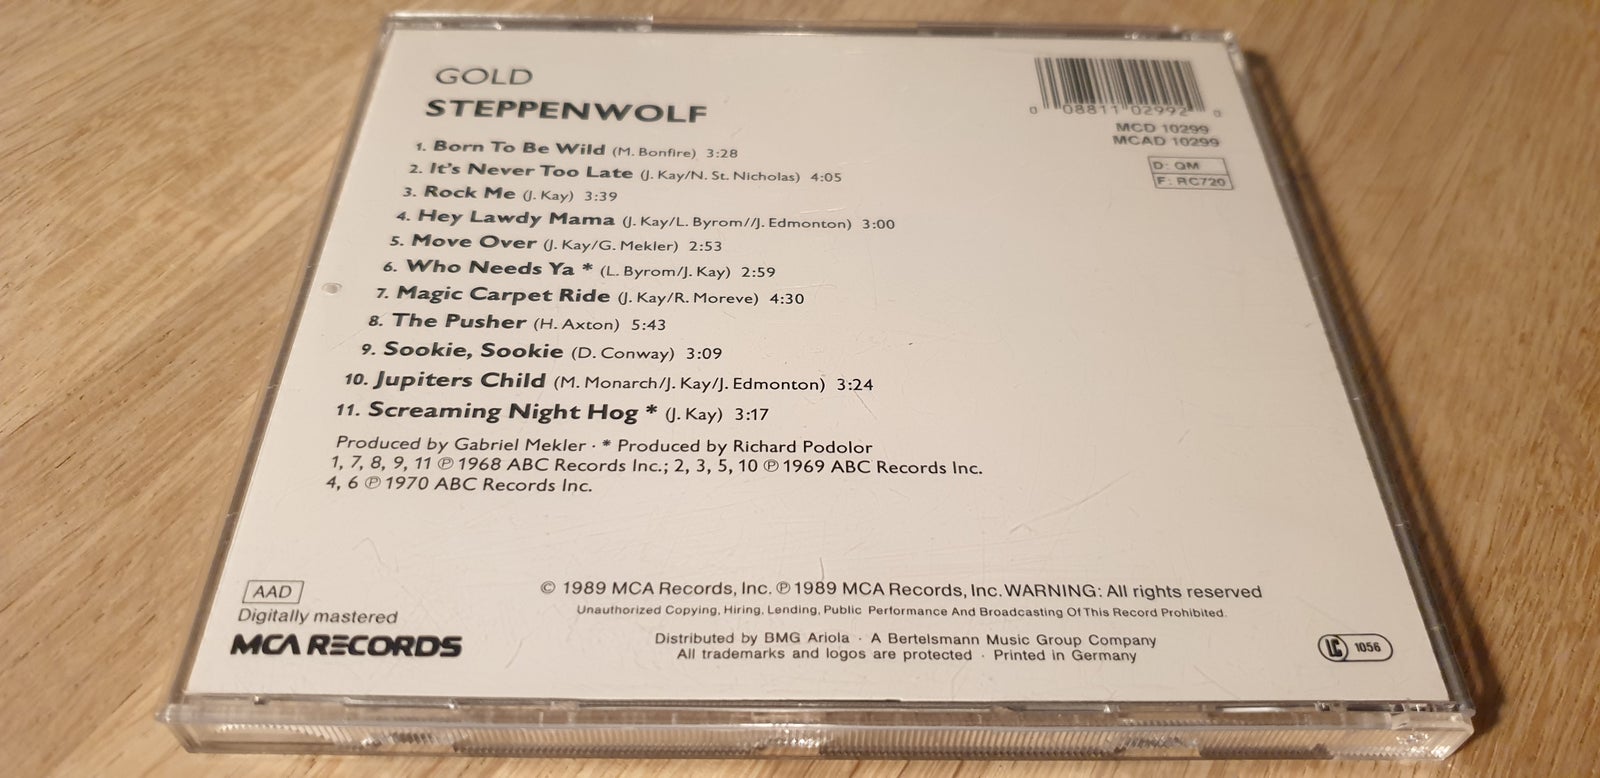 Steppenwolf: Gold (Their Great Hits), rock